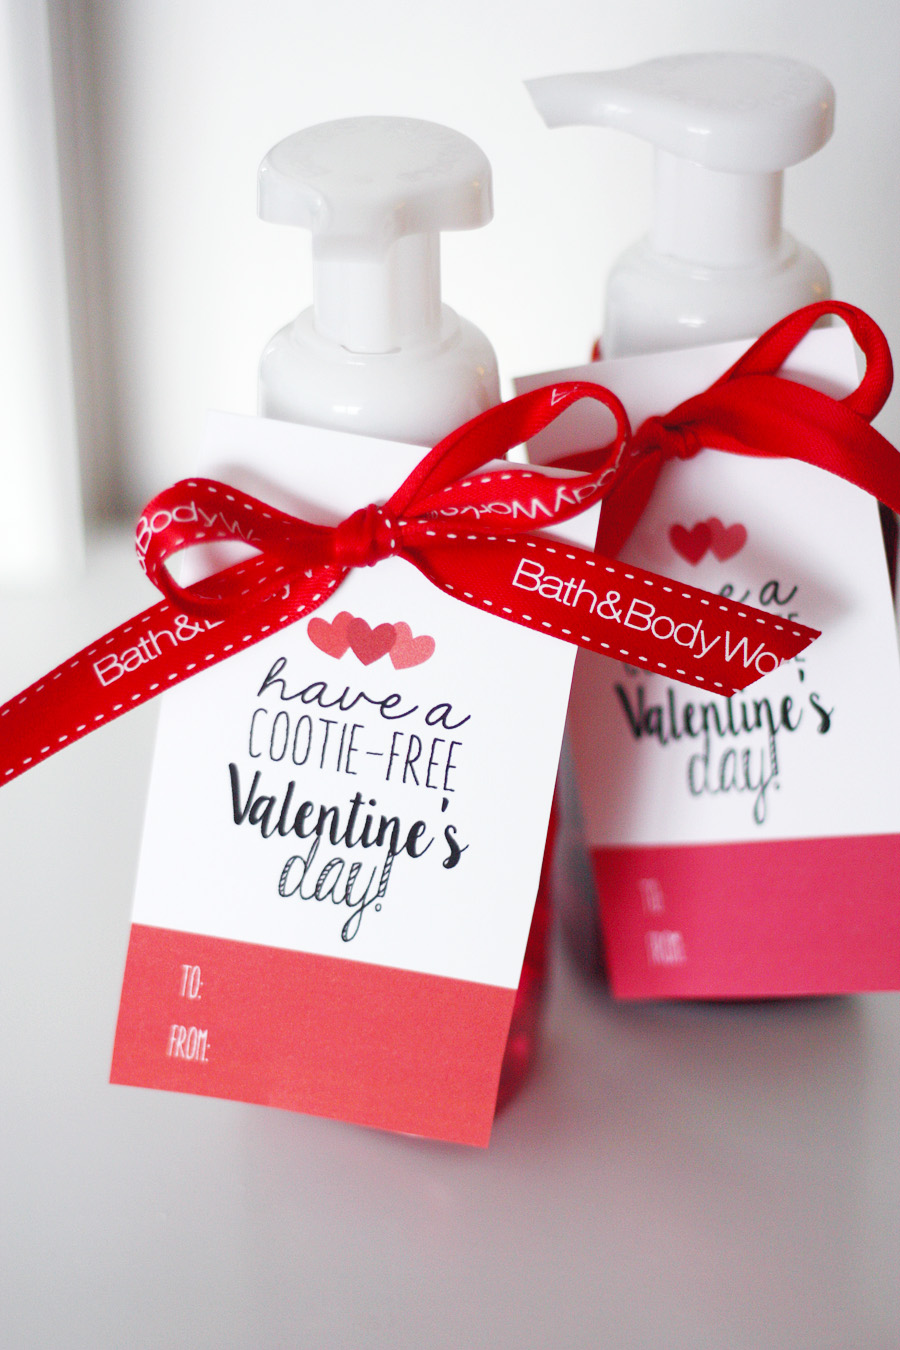 Have a Cootie-Free Valentine's Day! | Free Printable Valentine's Day Tag